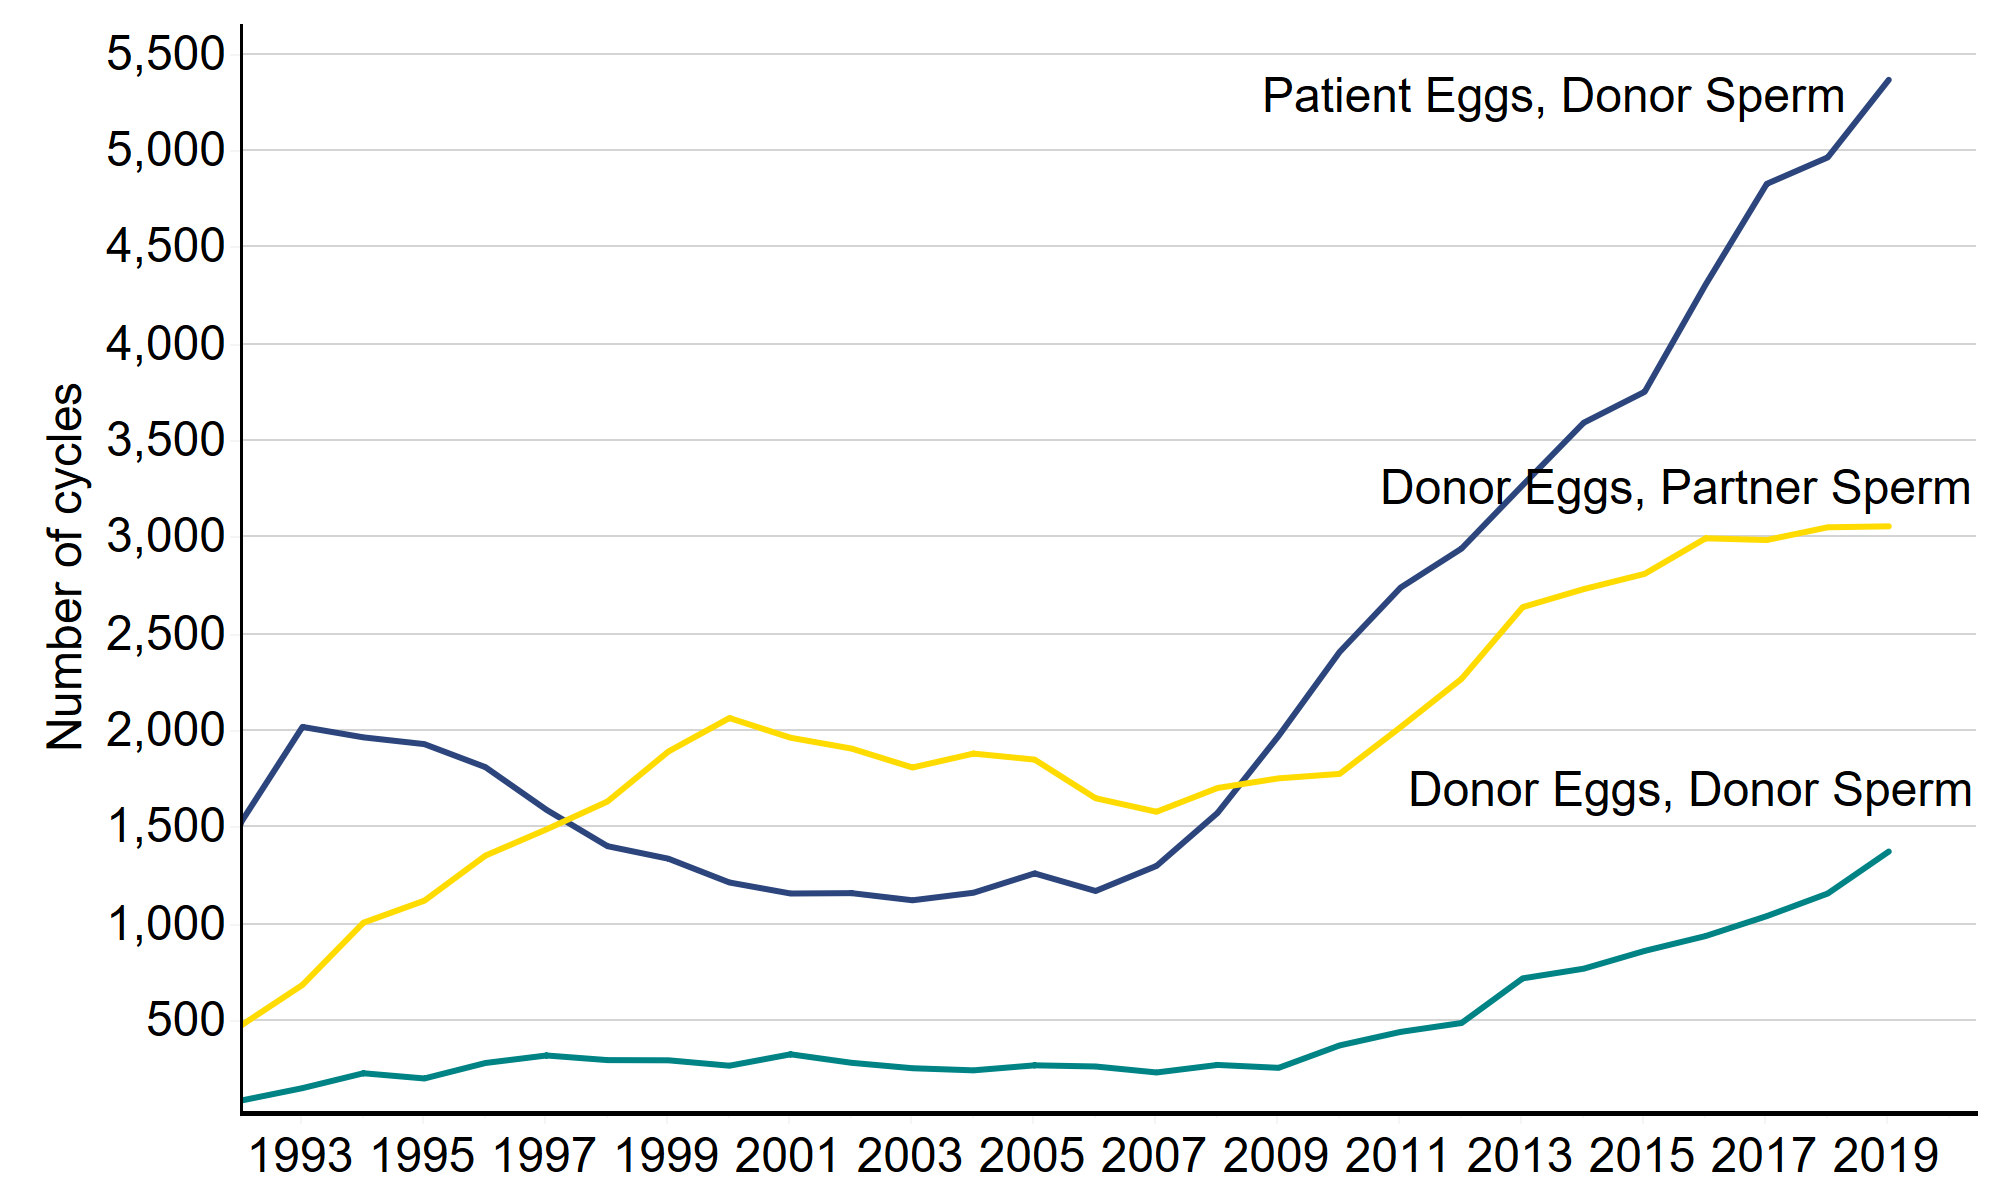 This line chart shows the number of IVF cycles using either donor eggs and donor sperm, donor eggs and partner sperm or patient eggs and donor sperm. In 2019, patient eggs and donor sperm was the most popular use of donation followed by donor eggs and partner sperm and then donor eggs and donor sperm. Between 1997 and 2007 donor eggs and partner sperm cycles were more common than patient eggs and donor sperm cycles. From 2008 to 2019 there was an increase in the use of all three combinations of donation, with patient eggs and donor sperm having the largest increase.  An accessible form of the underlying data for this figure can be downloaded beneath the image in .xls format.